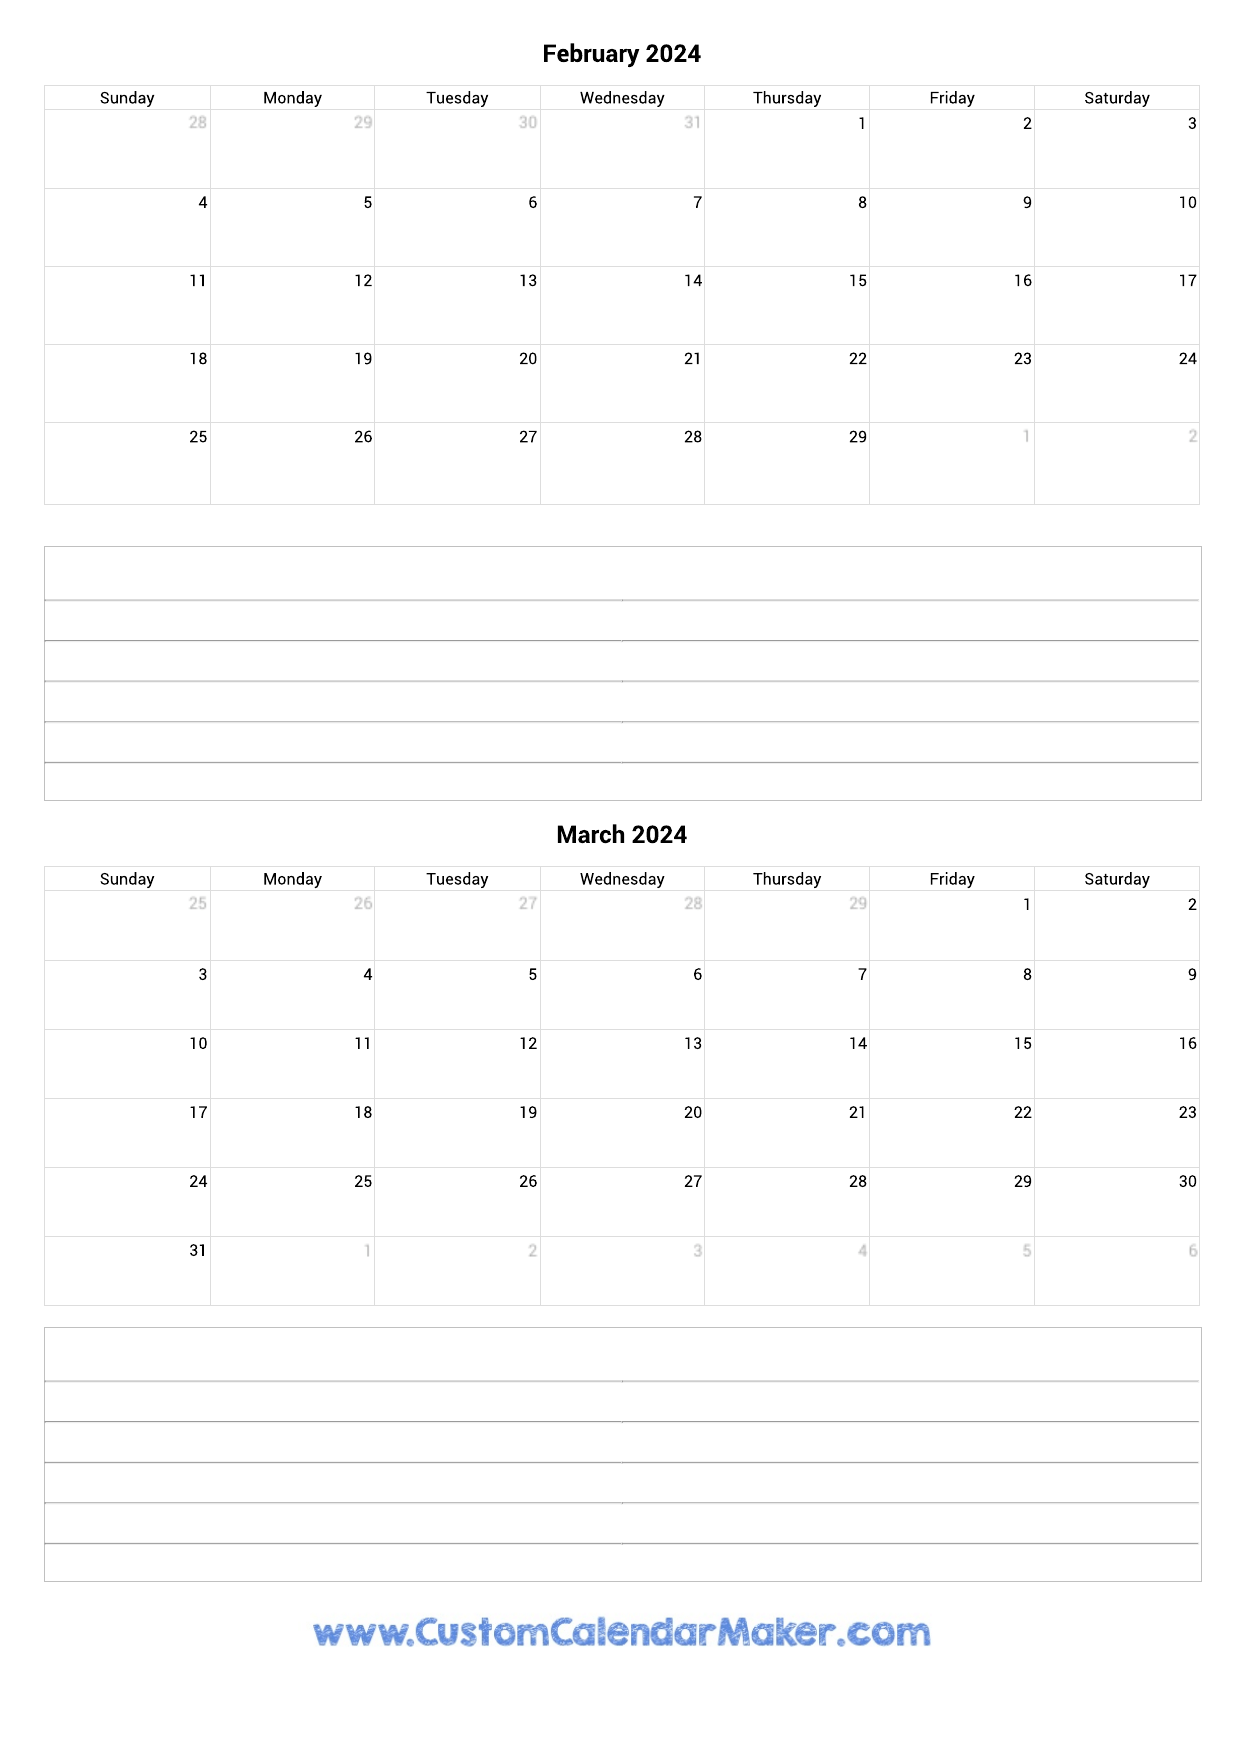 February And March 2024 Calendar for Printable Calendar 2024 February March